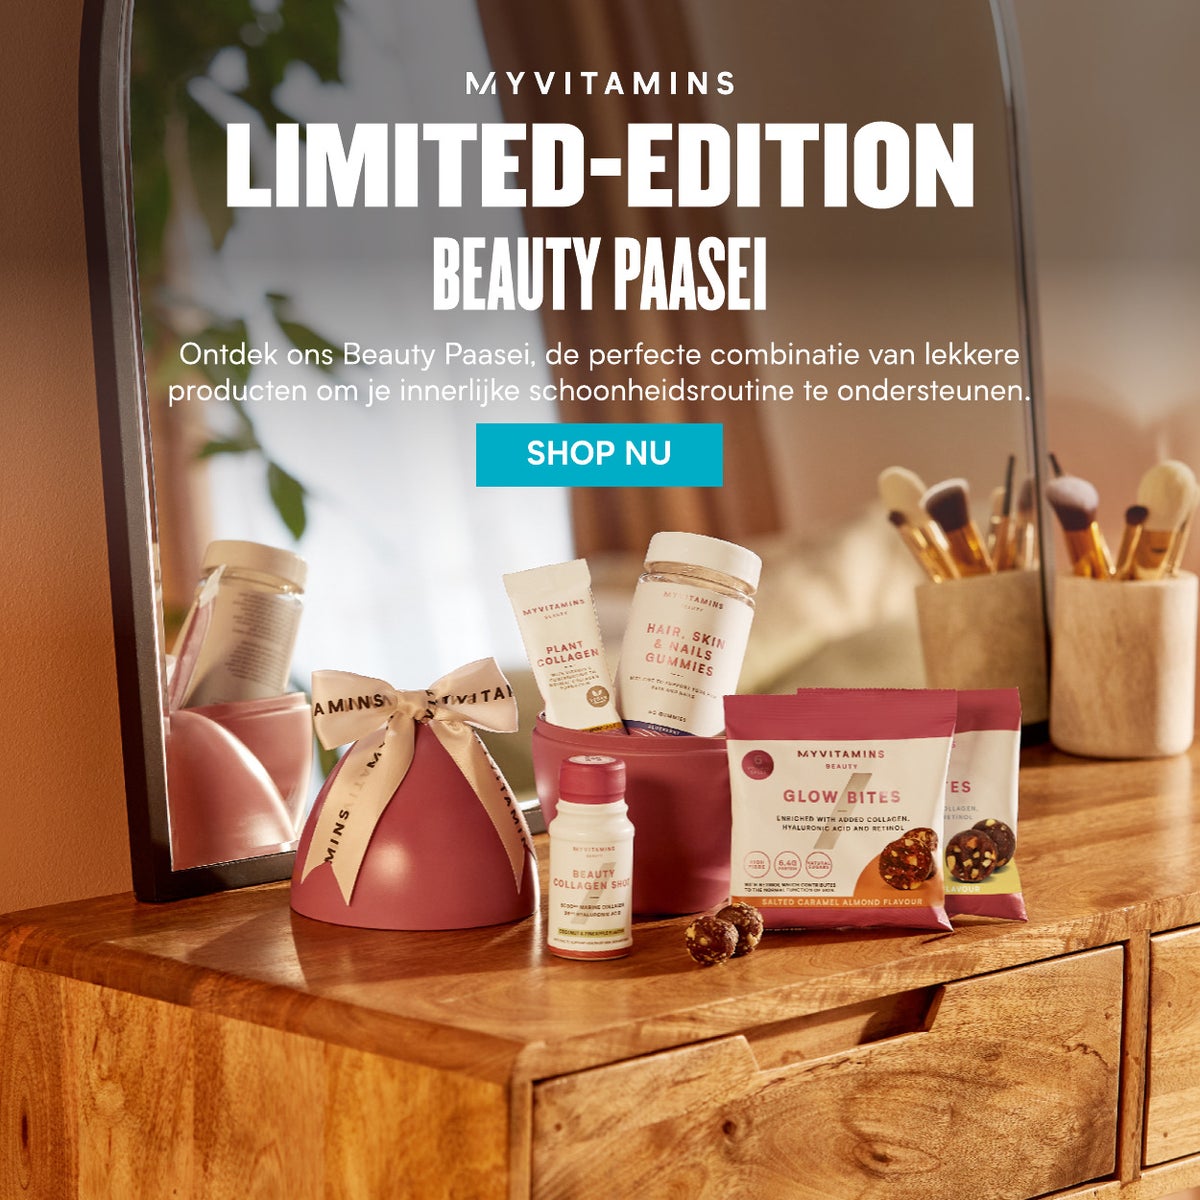 Limited-Edition - Beauty Paasei